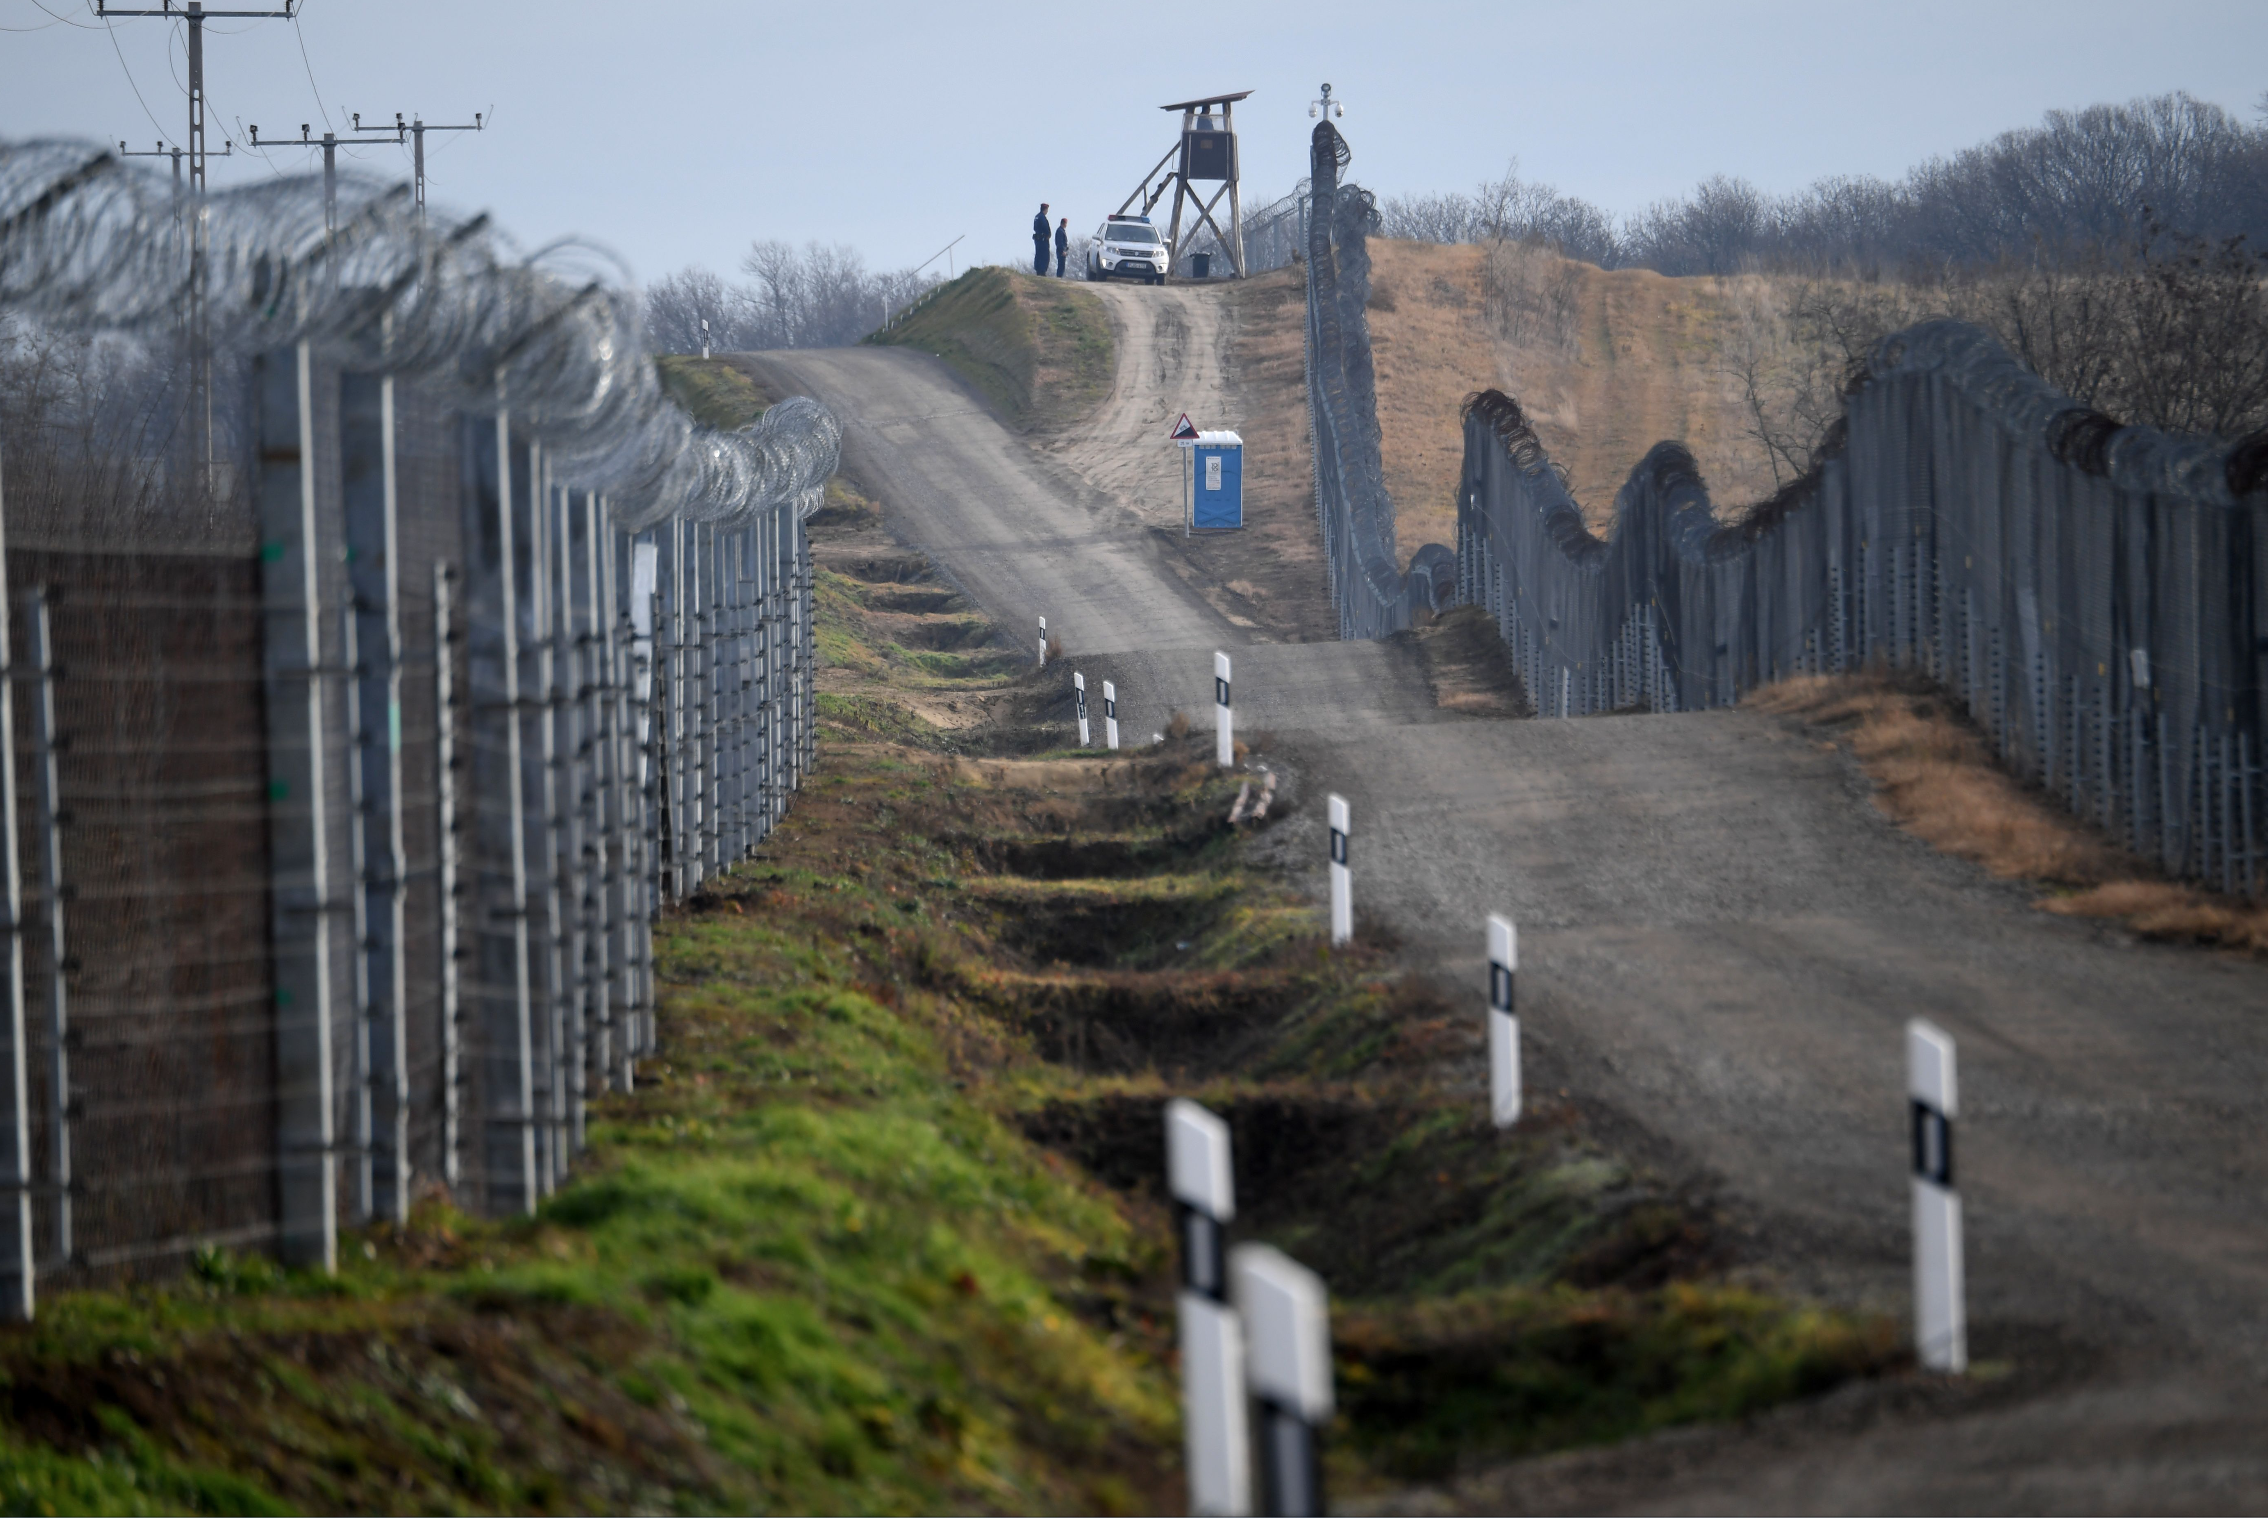 Hungary has beefed up its border fence with Serbia in response to the refugee crisis